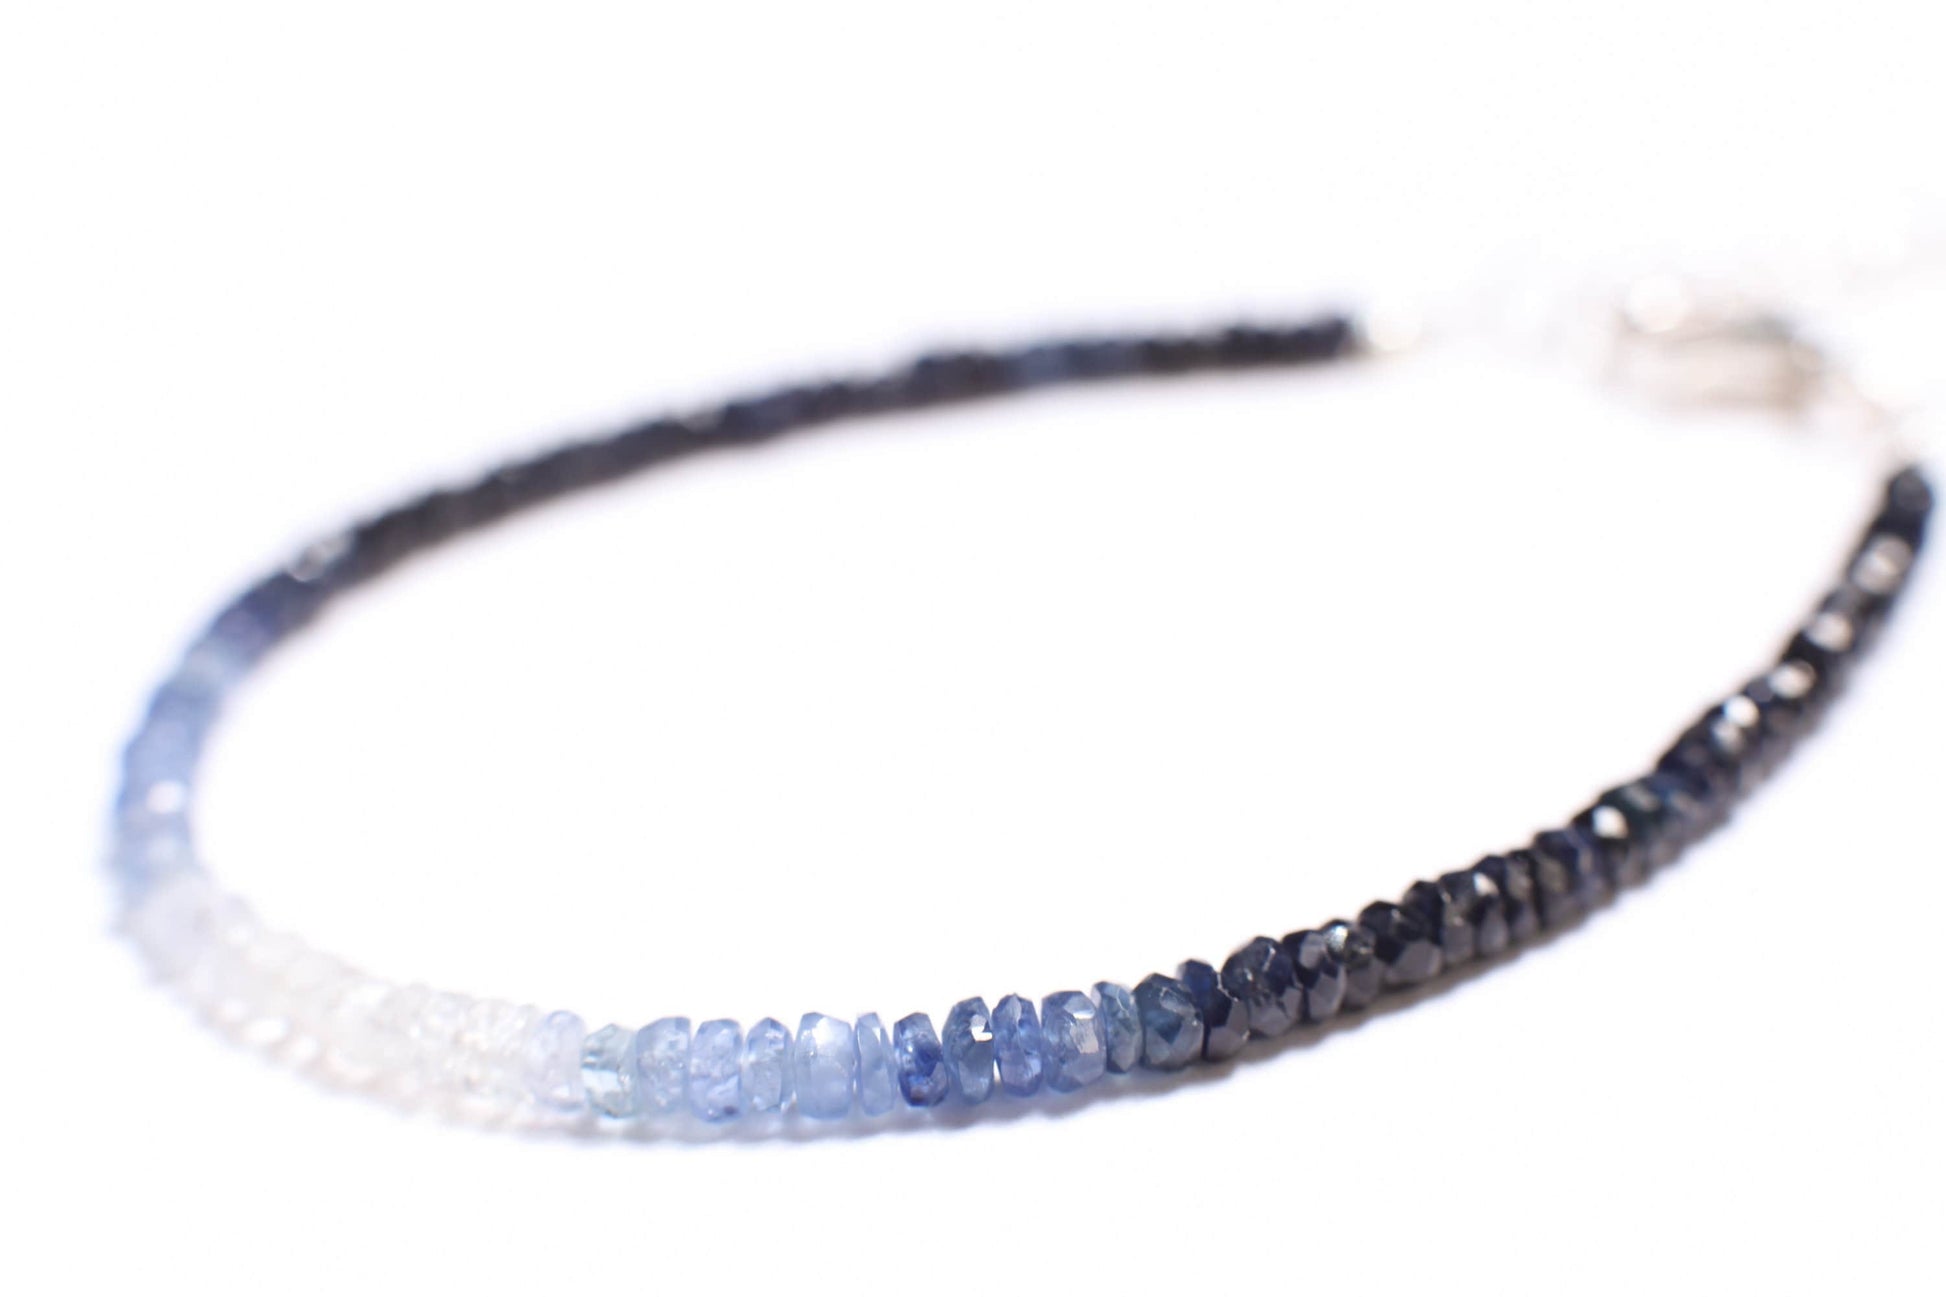 Ombre Sapphire Faceted Rondelle 2.8-3mm Bracelet in 925 Sterling Silver Clasp and 1&quot; Extension Chain, AAAQuality, September Birthstone, Gift